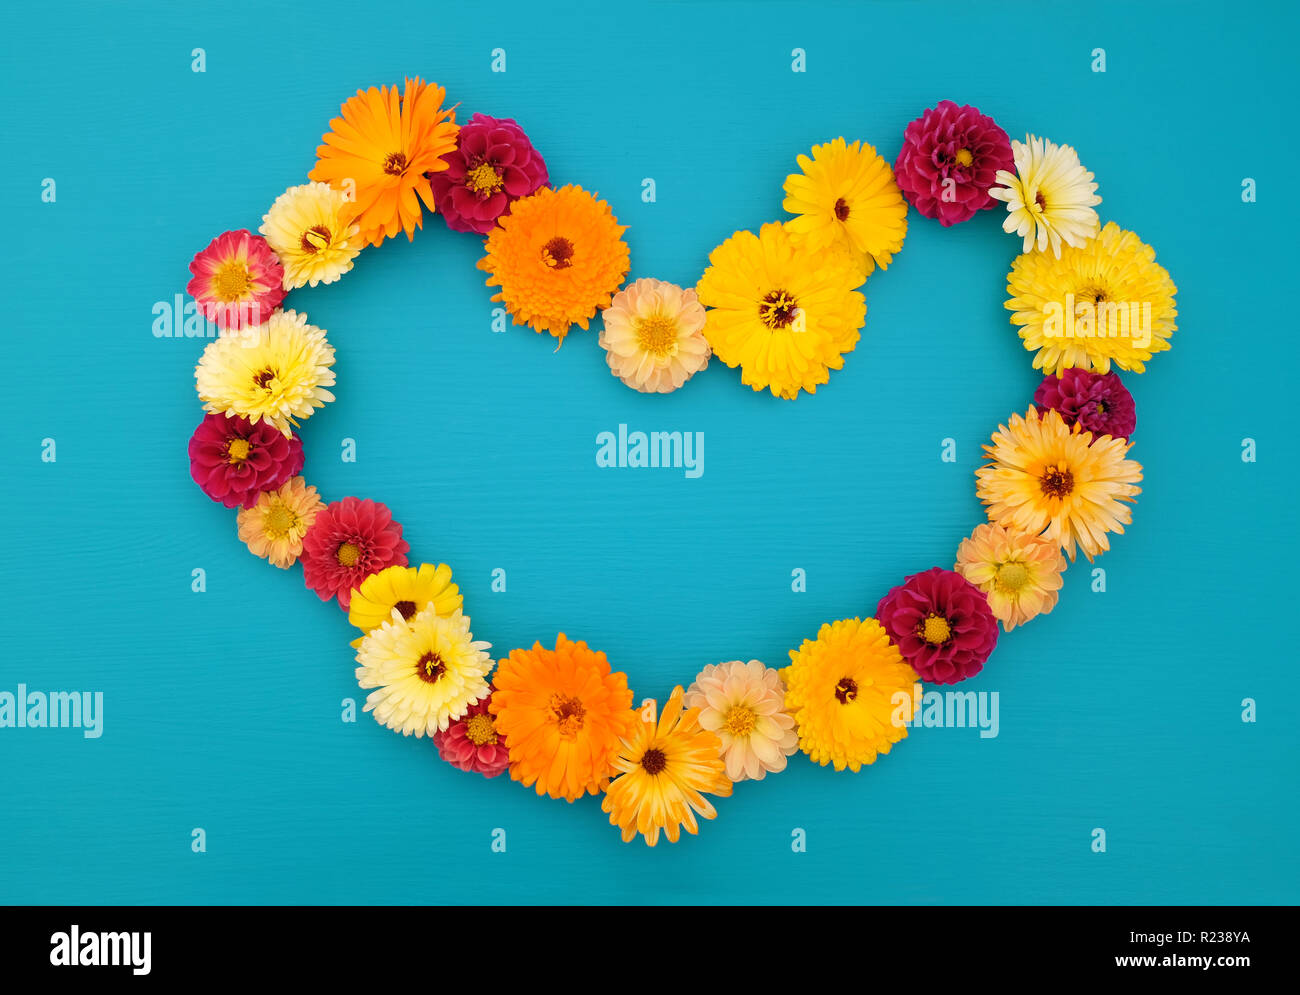 Hollow heart shape of dahlias and calendulas on a teal-coloured wooden background with copy space Stock Photo